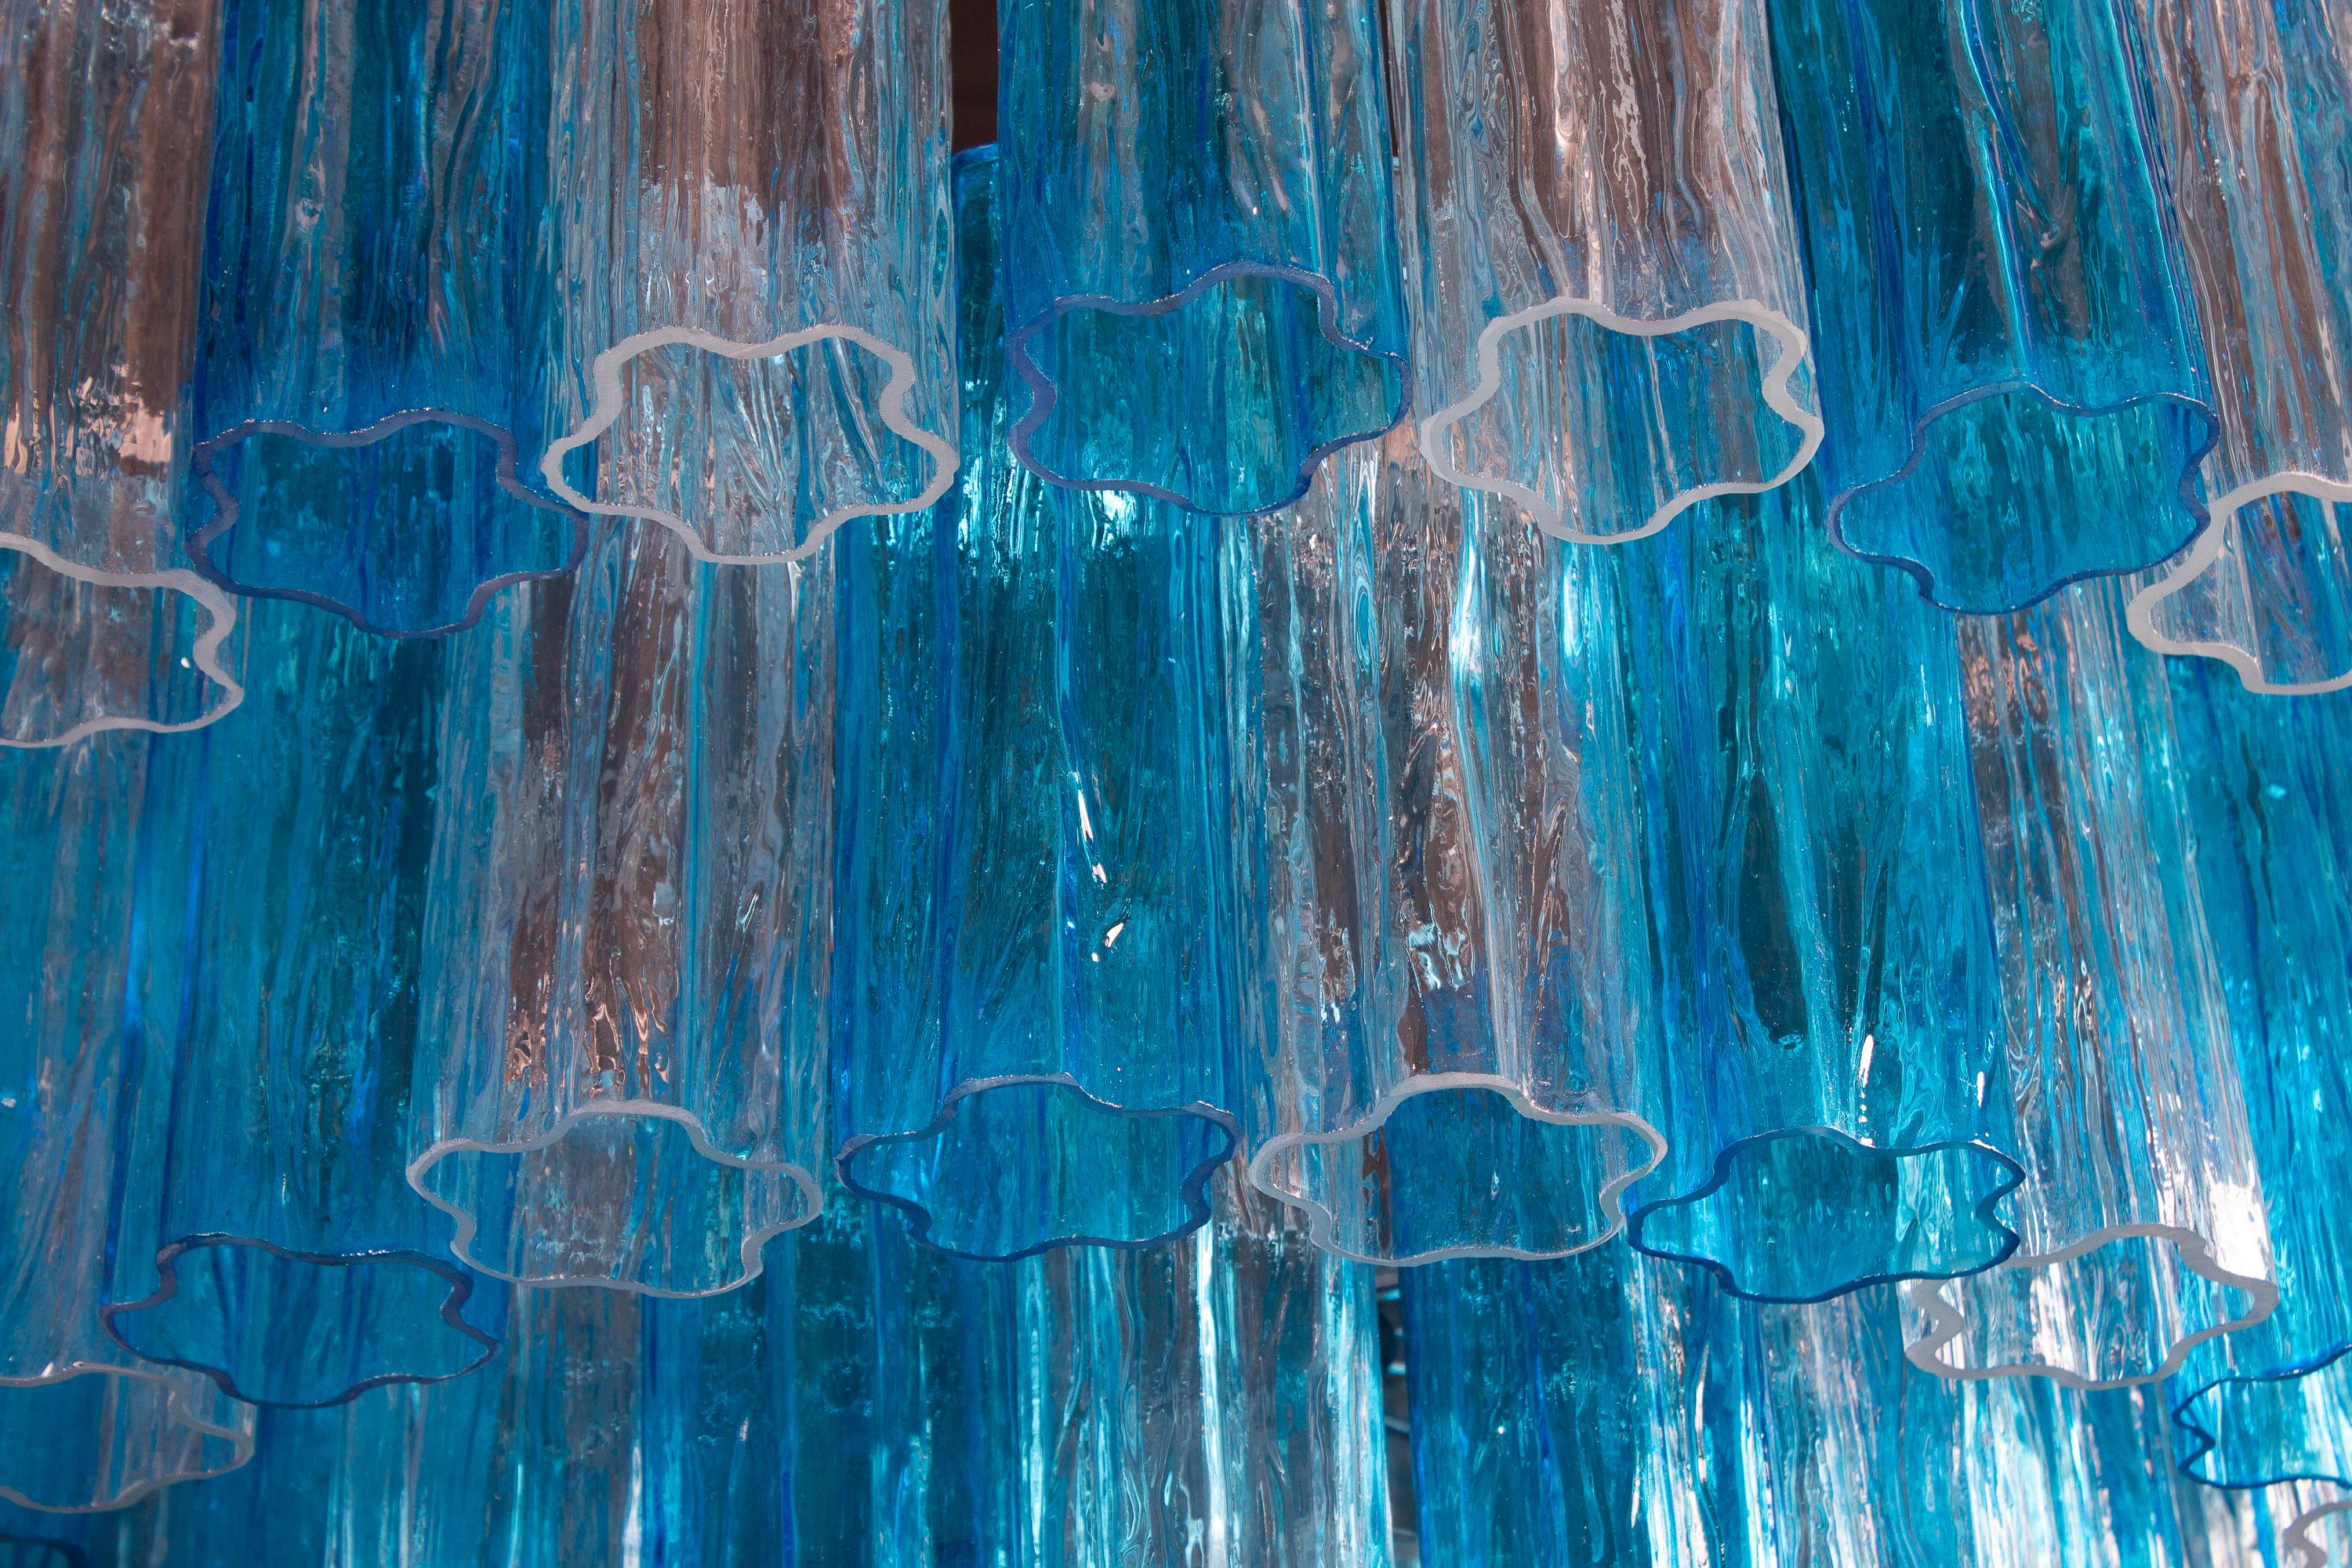 Blown Glass Blu Turquoise and Ice Color Murano Glass Tronchi Chandelier Ceiling Light For Sale